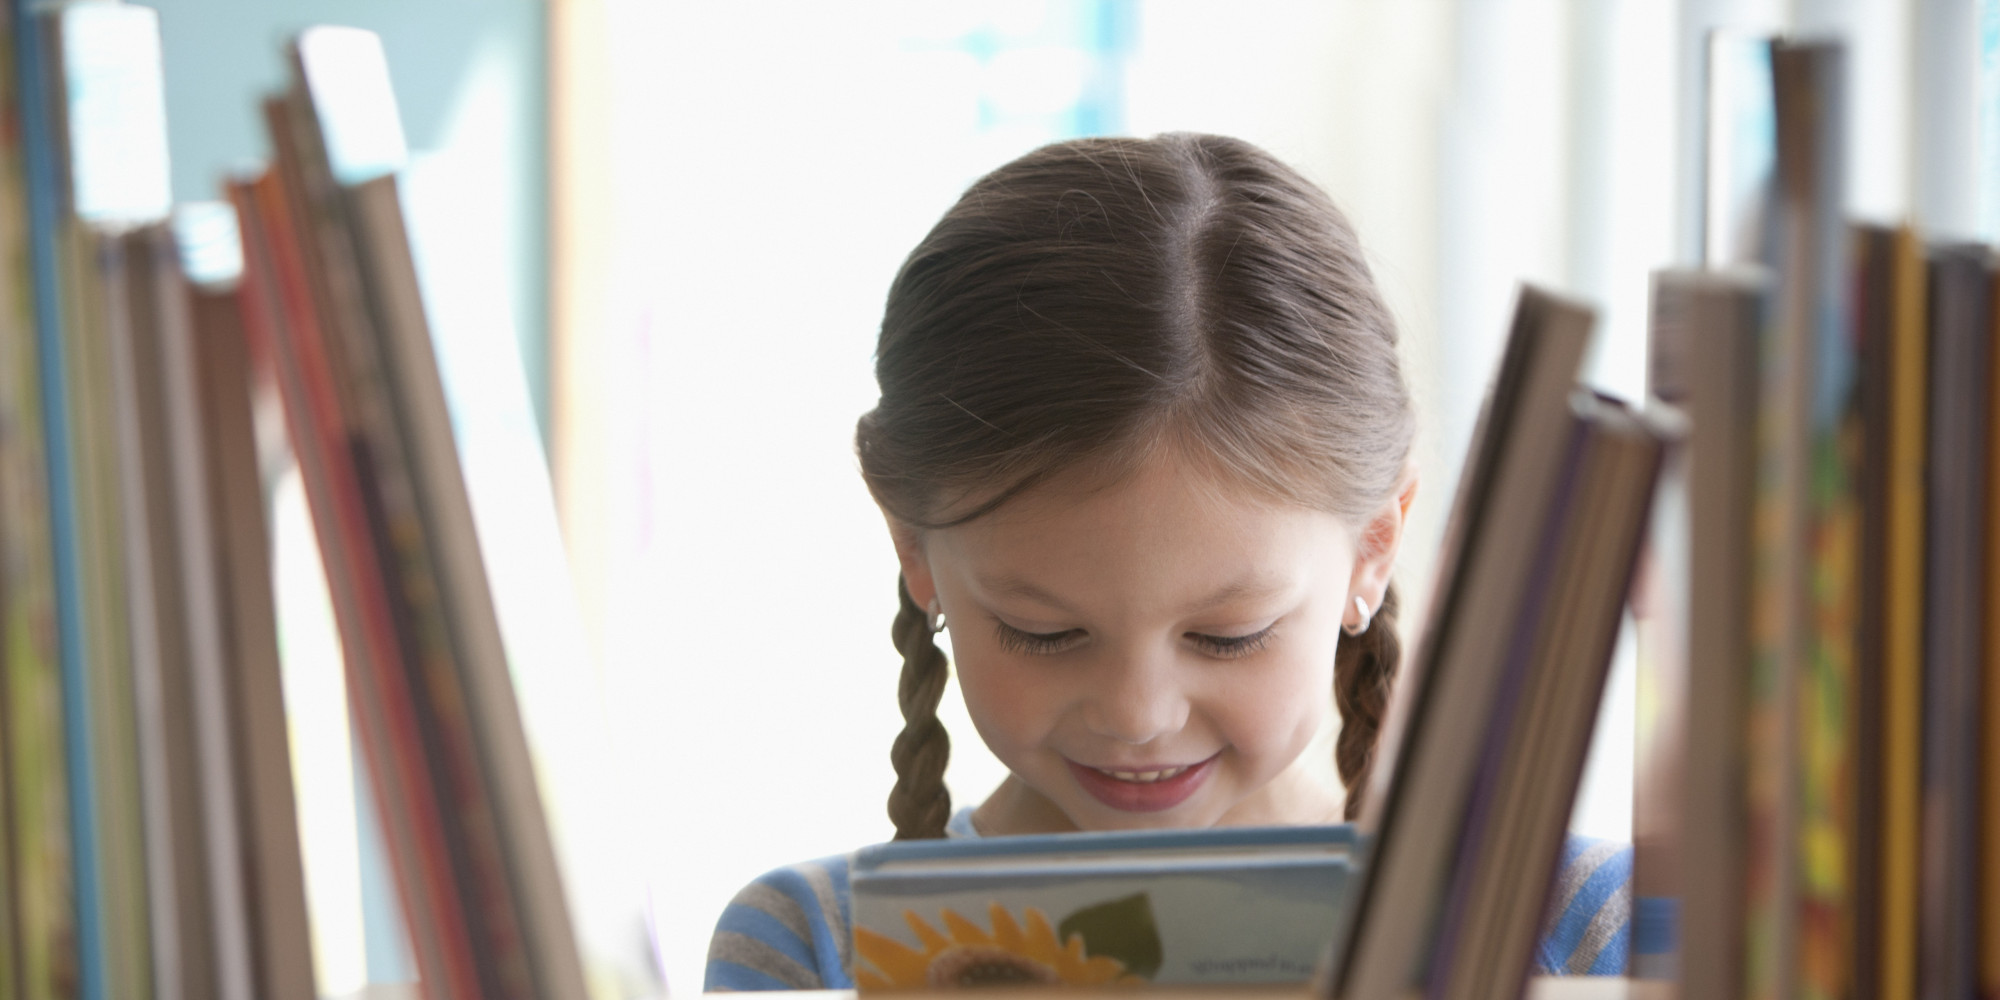 Parenting Made Easy: How to Help Your Child Learn to Read